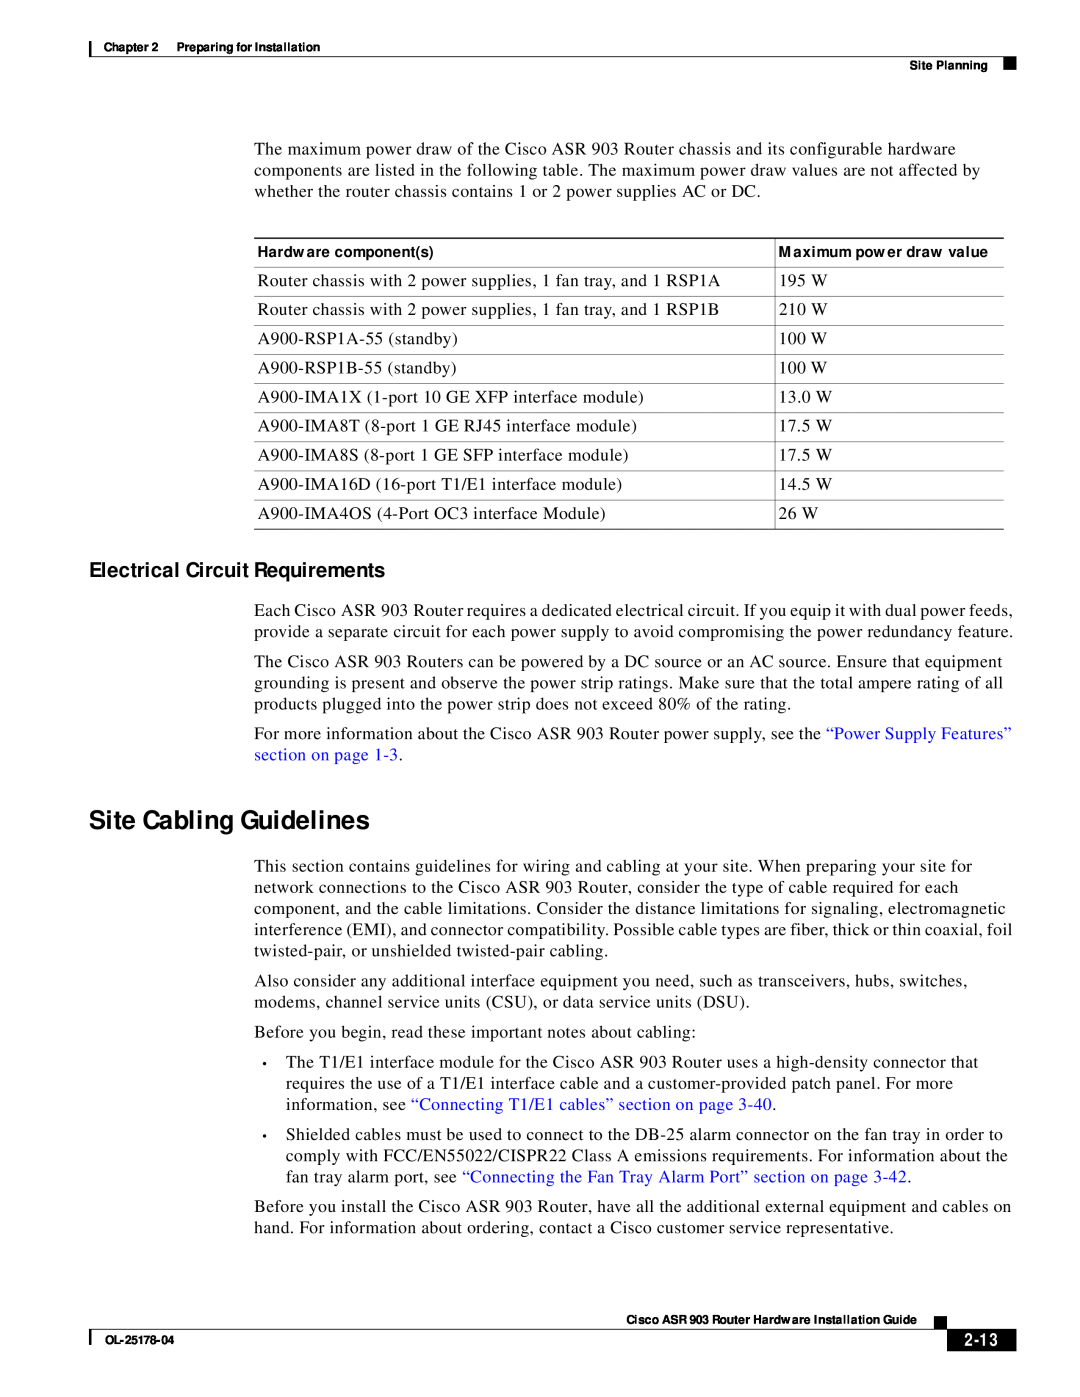 Cisco Systems ASR 903 manual Site Cabling Guidelines, Electrical Circuit Requirements, 2-13 